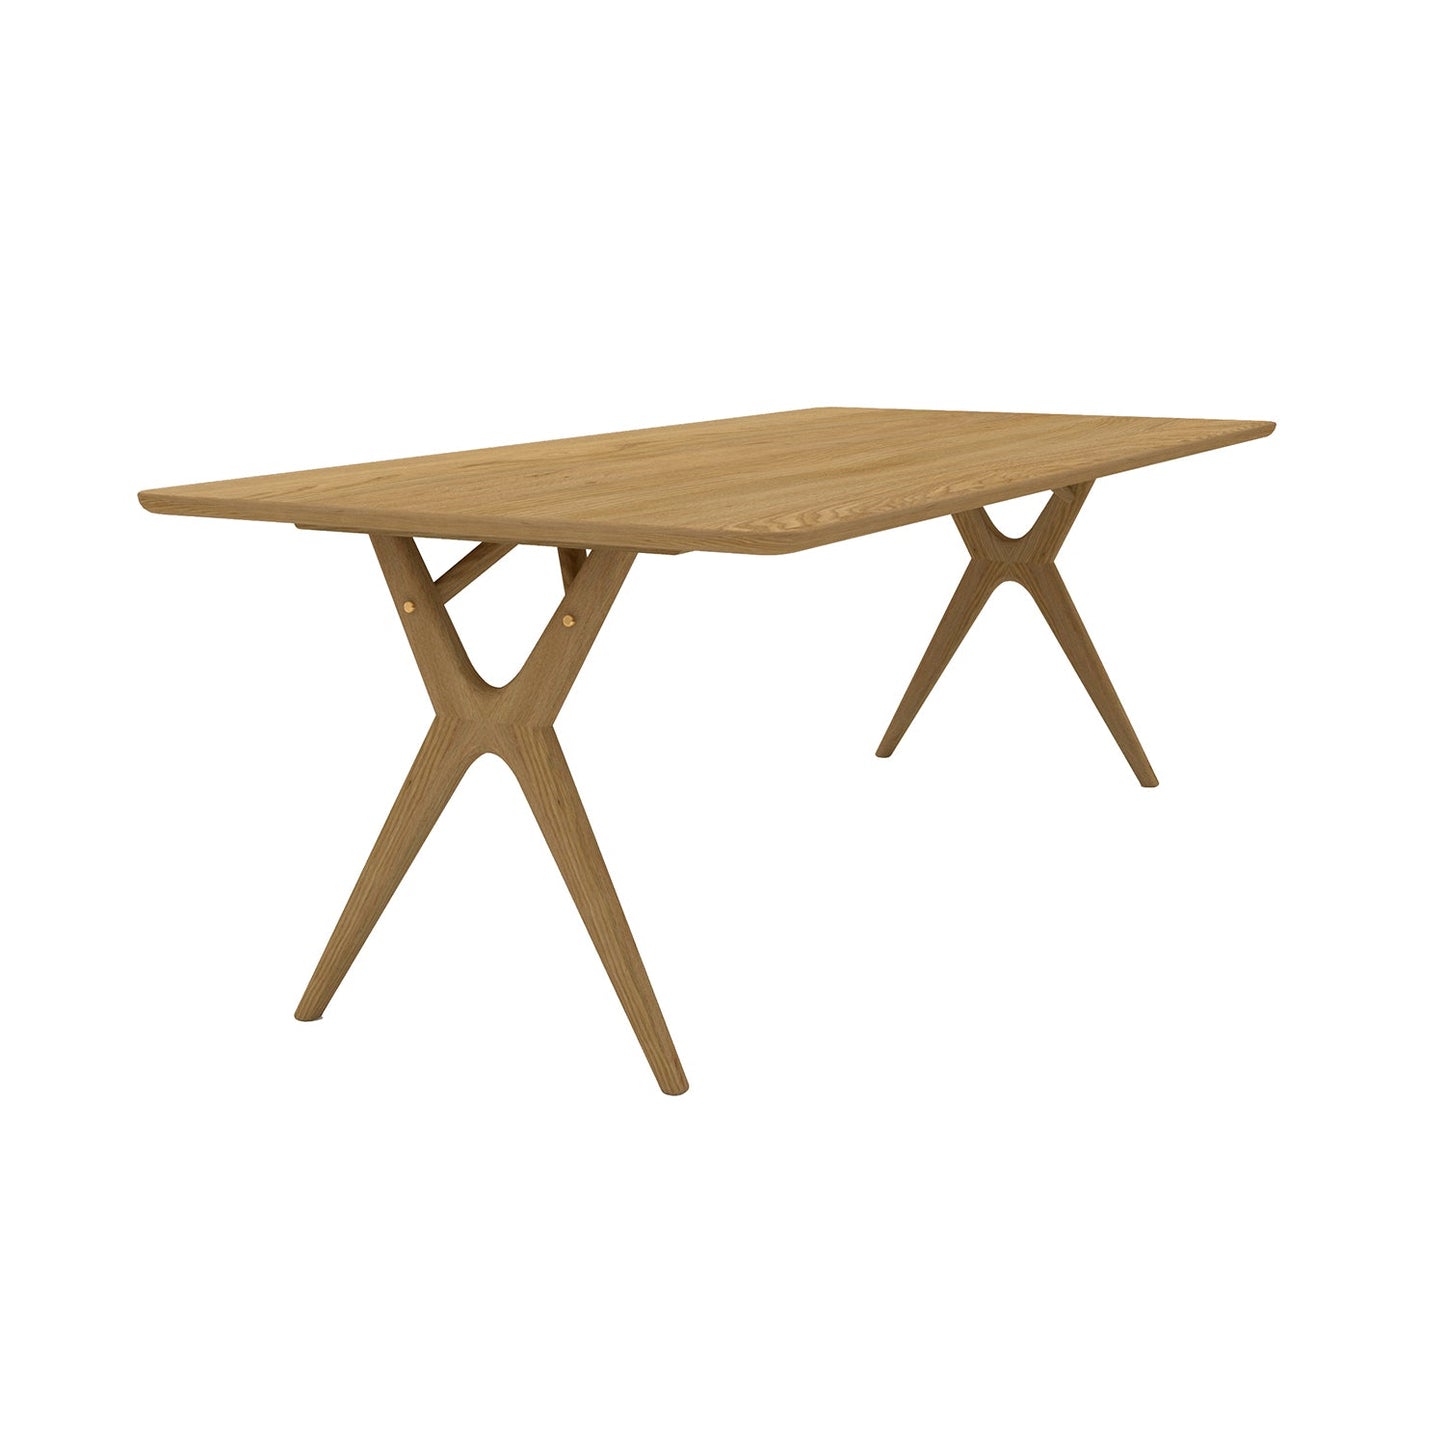 Rose Hill Oak Dining Table With Rounded Corners With Brass - 200cm Extending